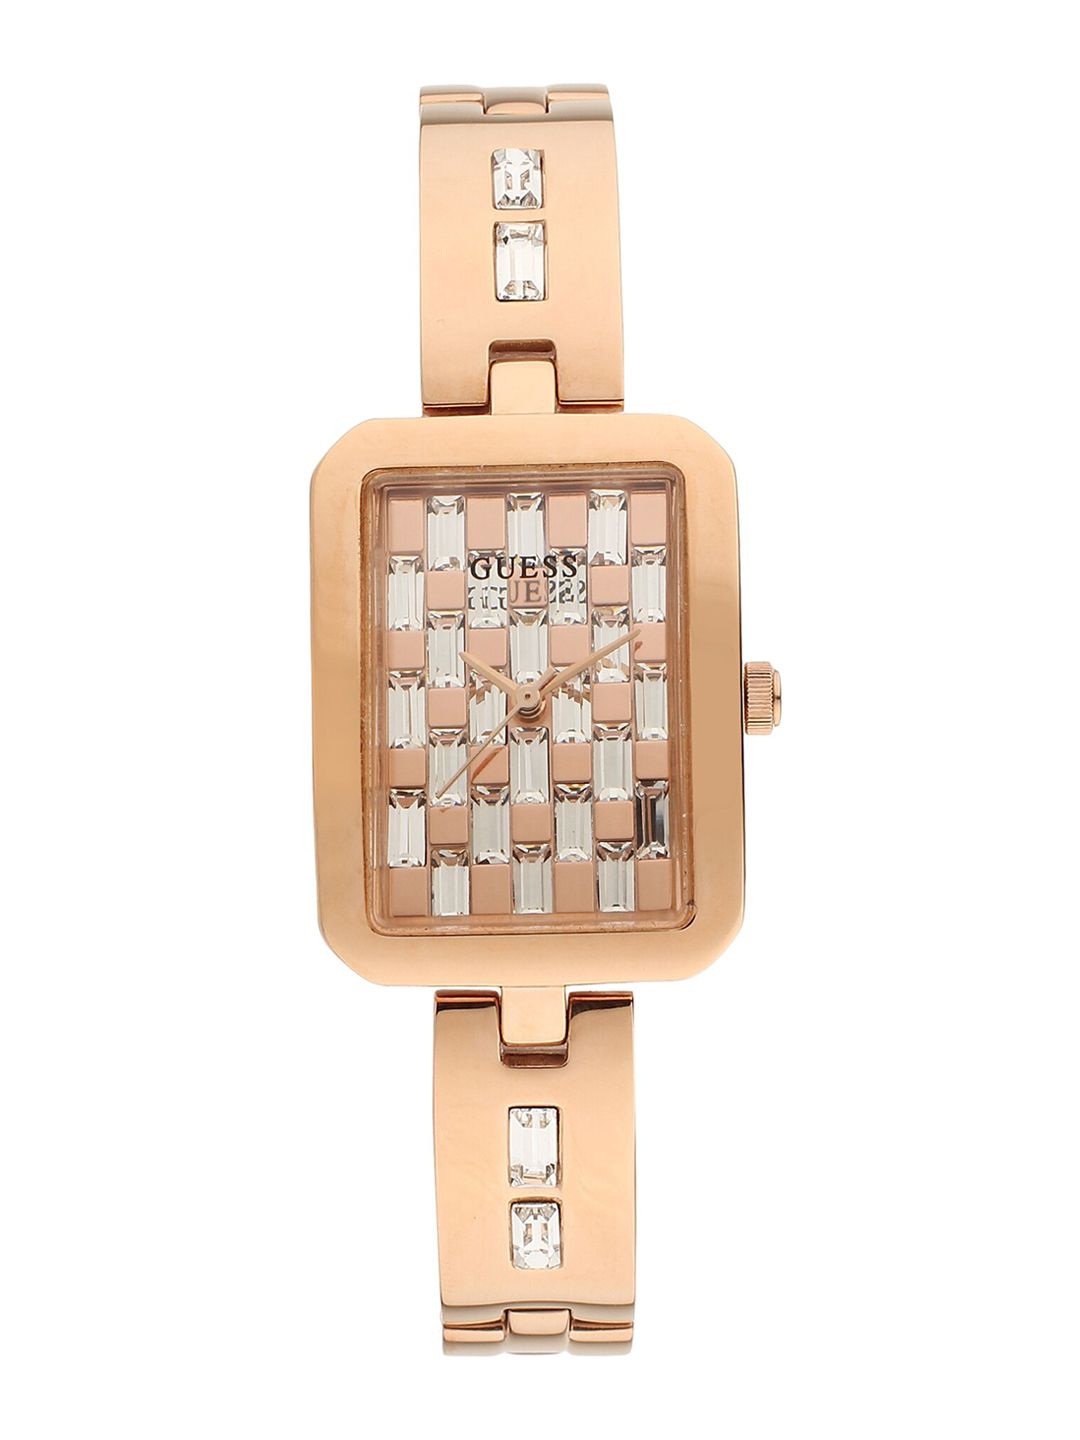 GUESS Women Analogue Rose Gold-Toned Embellished Dial With Bracelet Style Strap Watch Price in India